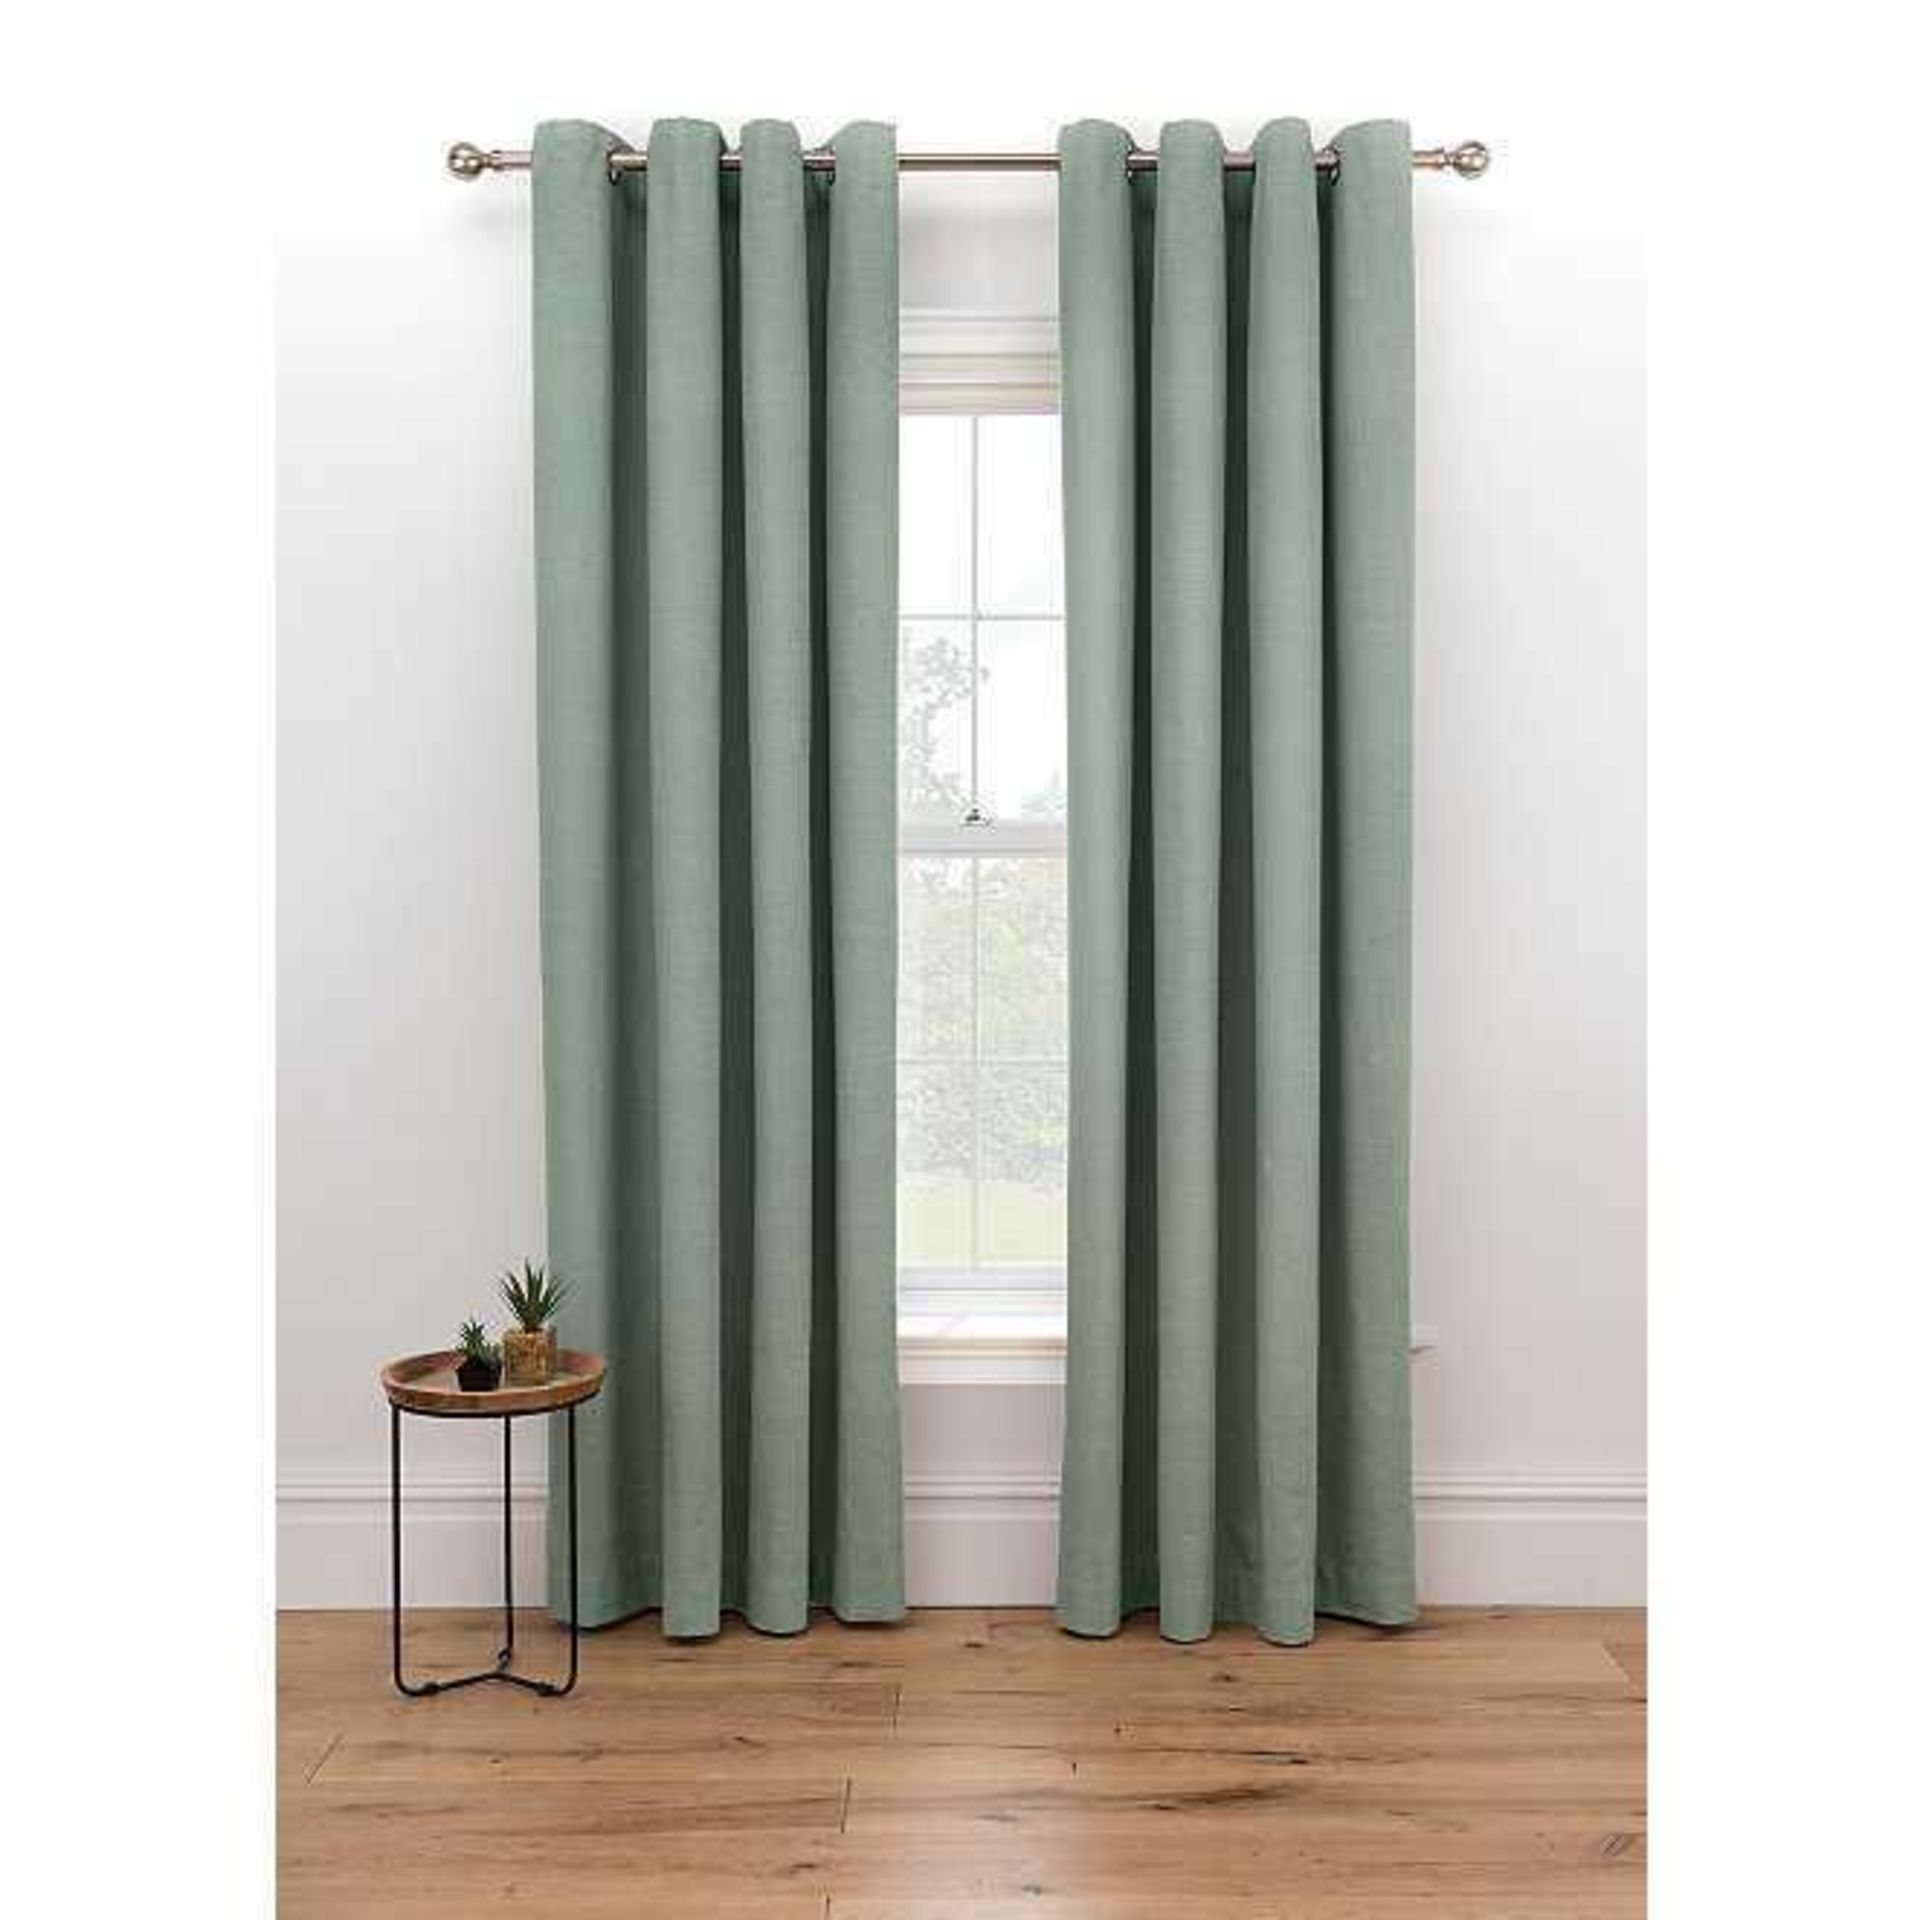 RRP £110 Bagged Fully Lined Eyelet Curtains By Debenhams Home Collection In Sage Green - Image 2 of 2